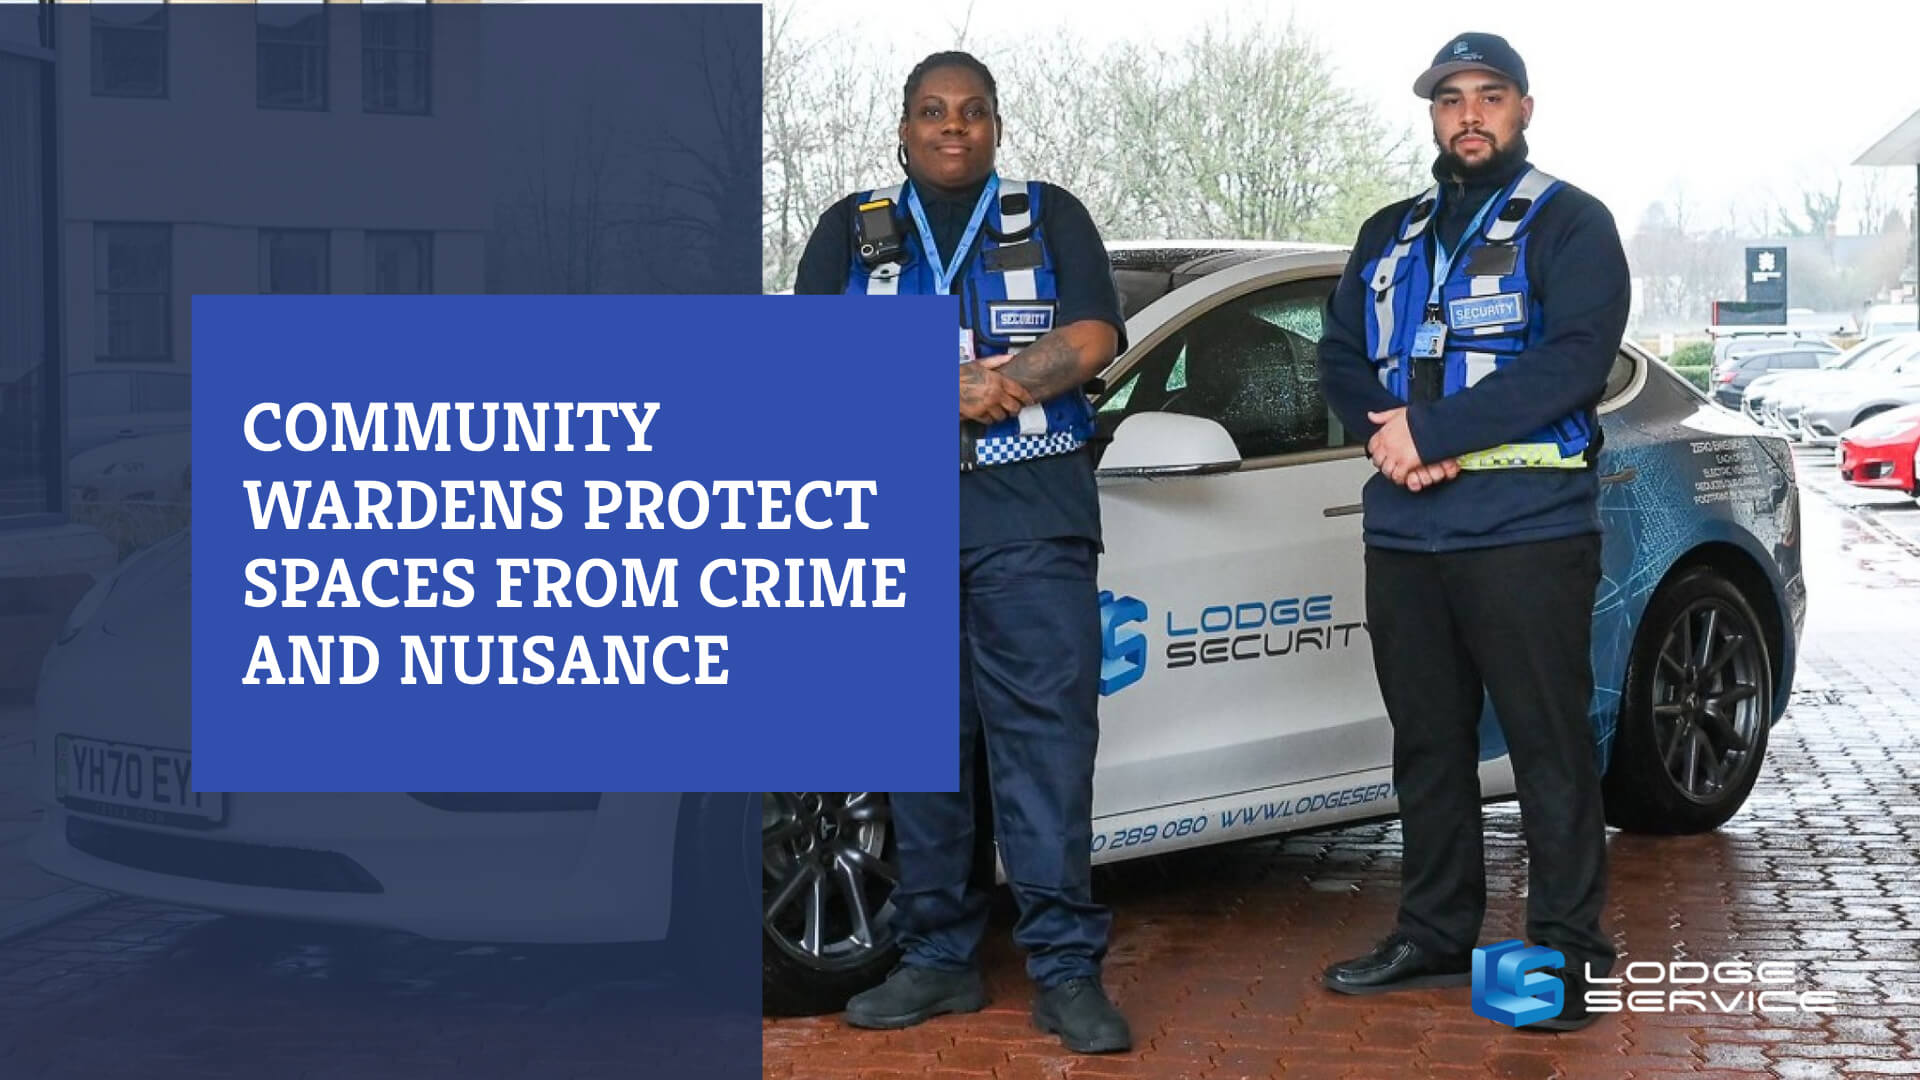 Community Wardens Protect Spaces from Crime and Nuisance